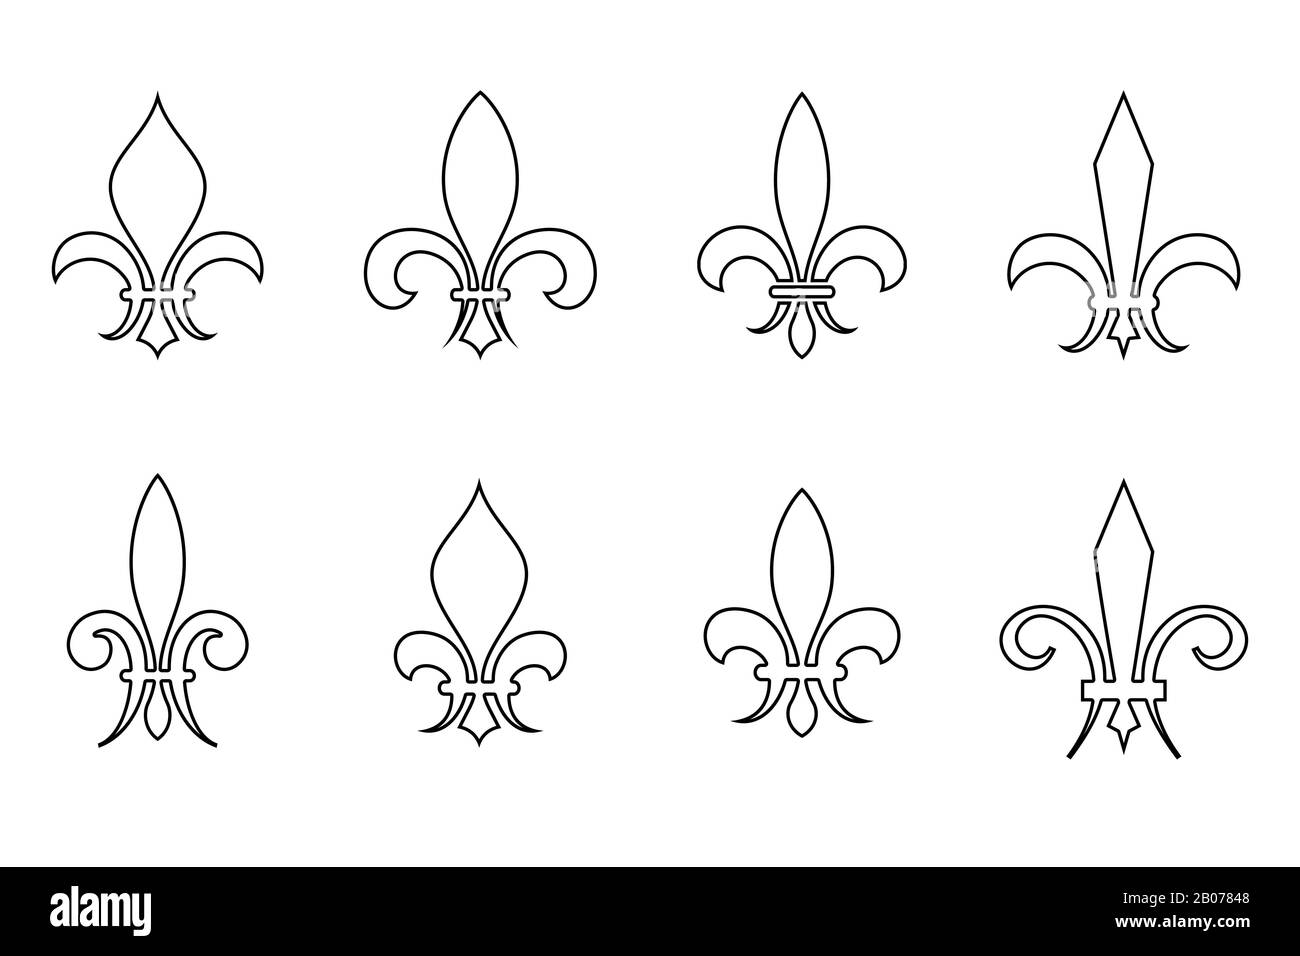 Lily outline illustration vector set. Floral design element in linear style Stock Vector